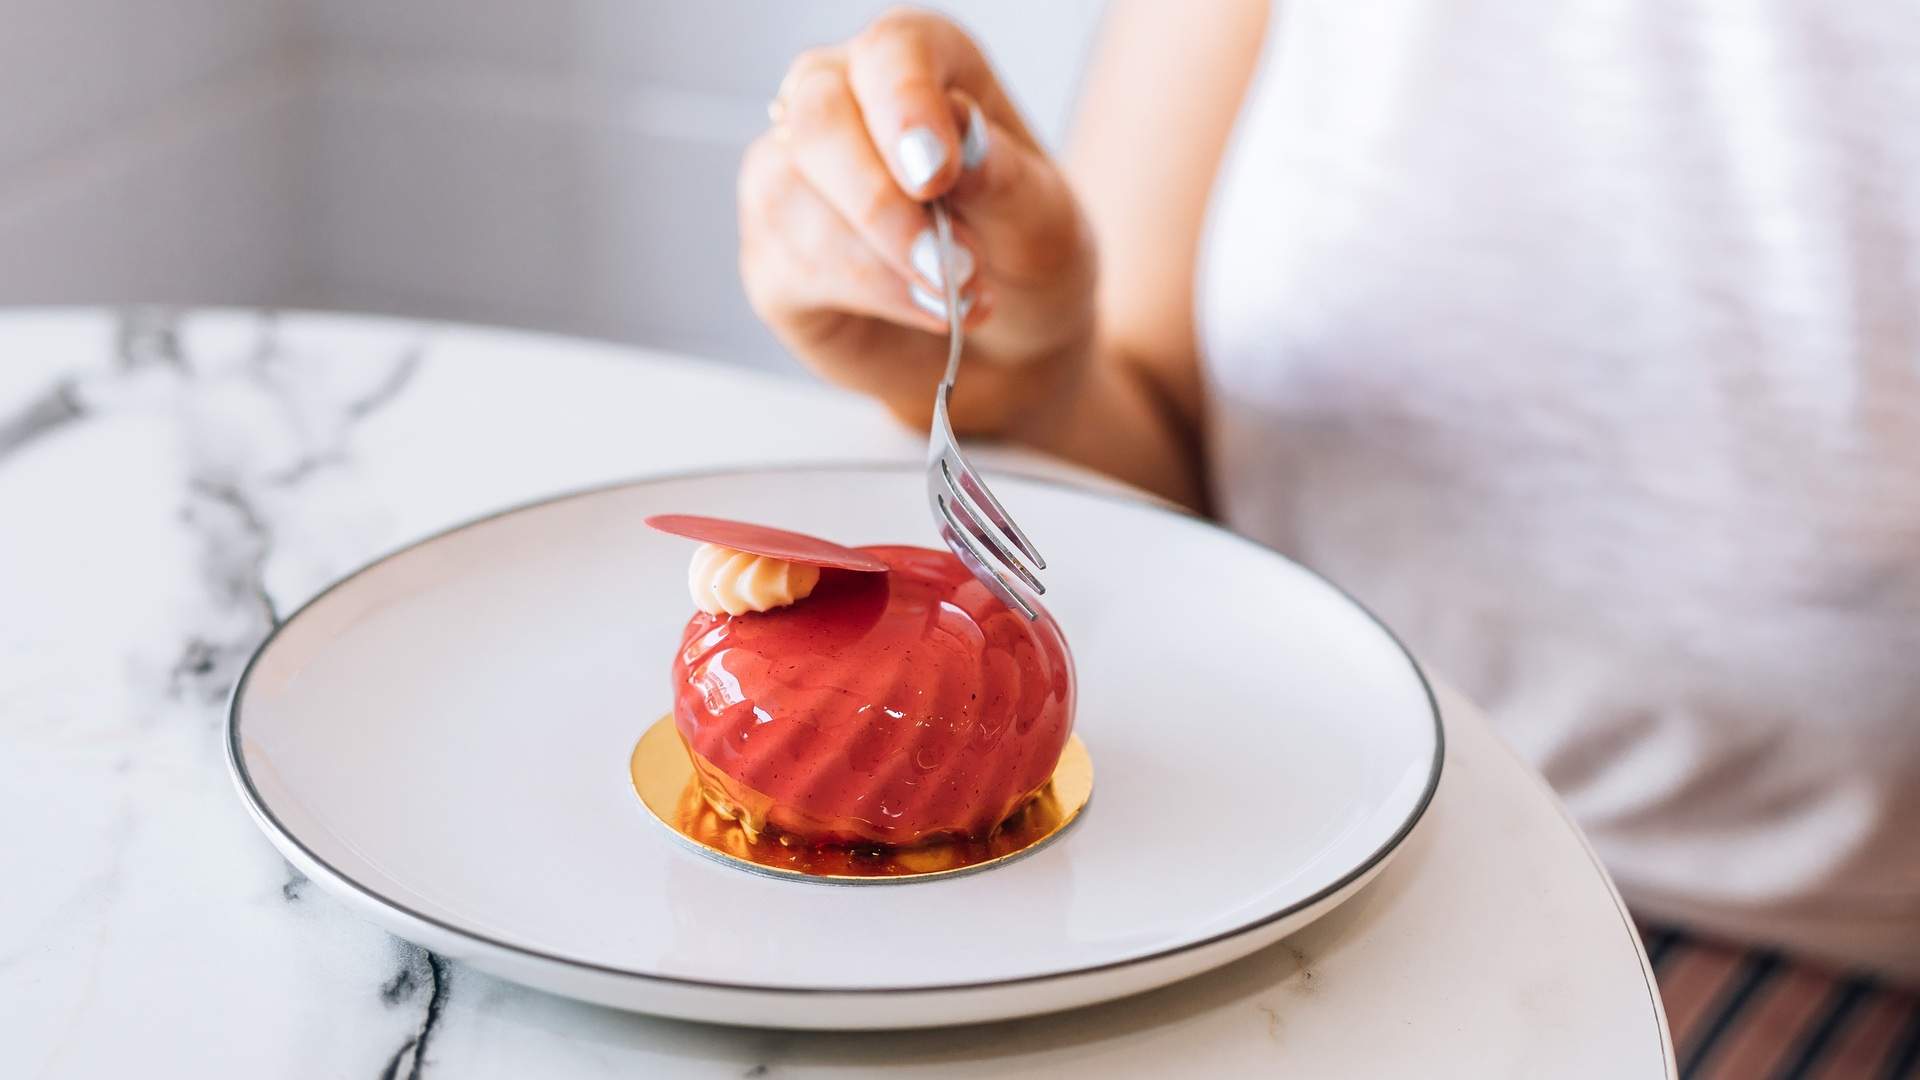 Madame & Yves Is Clovelly's New Patisserie and Bakery from One of Sydney's Top Pastry Chefs